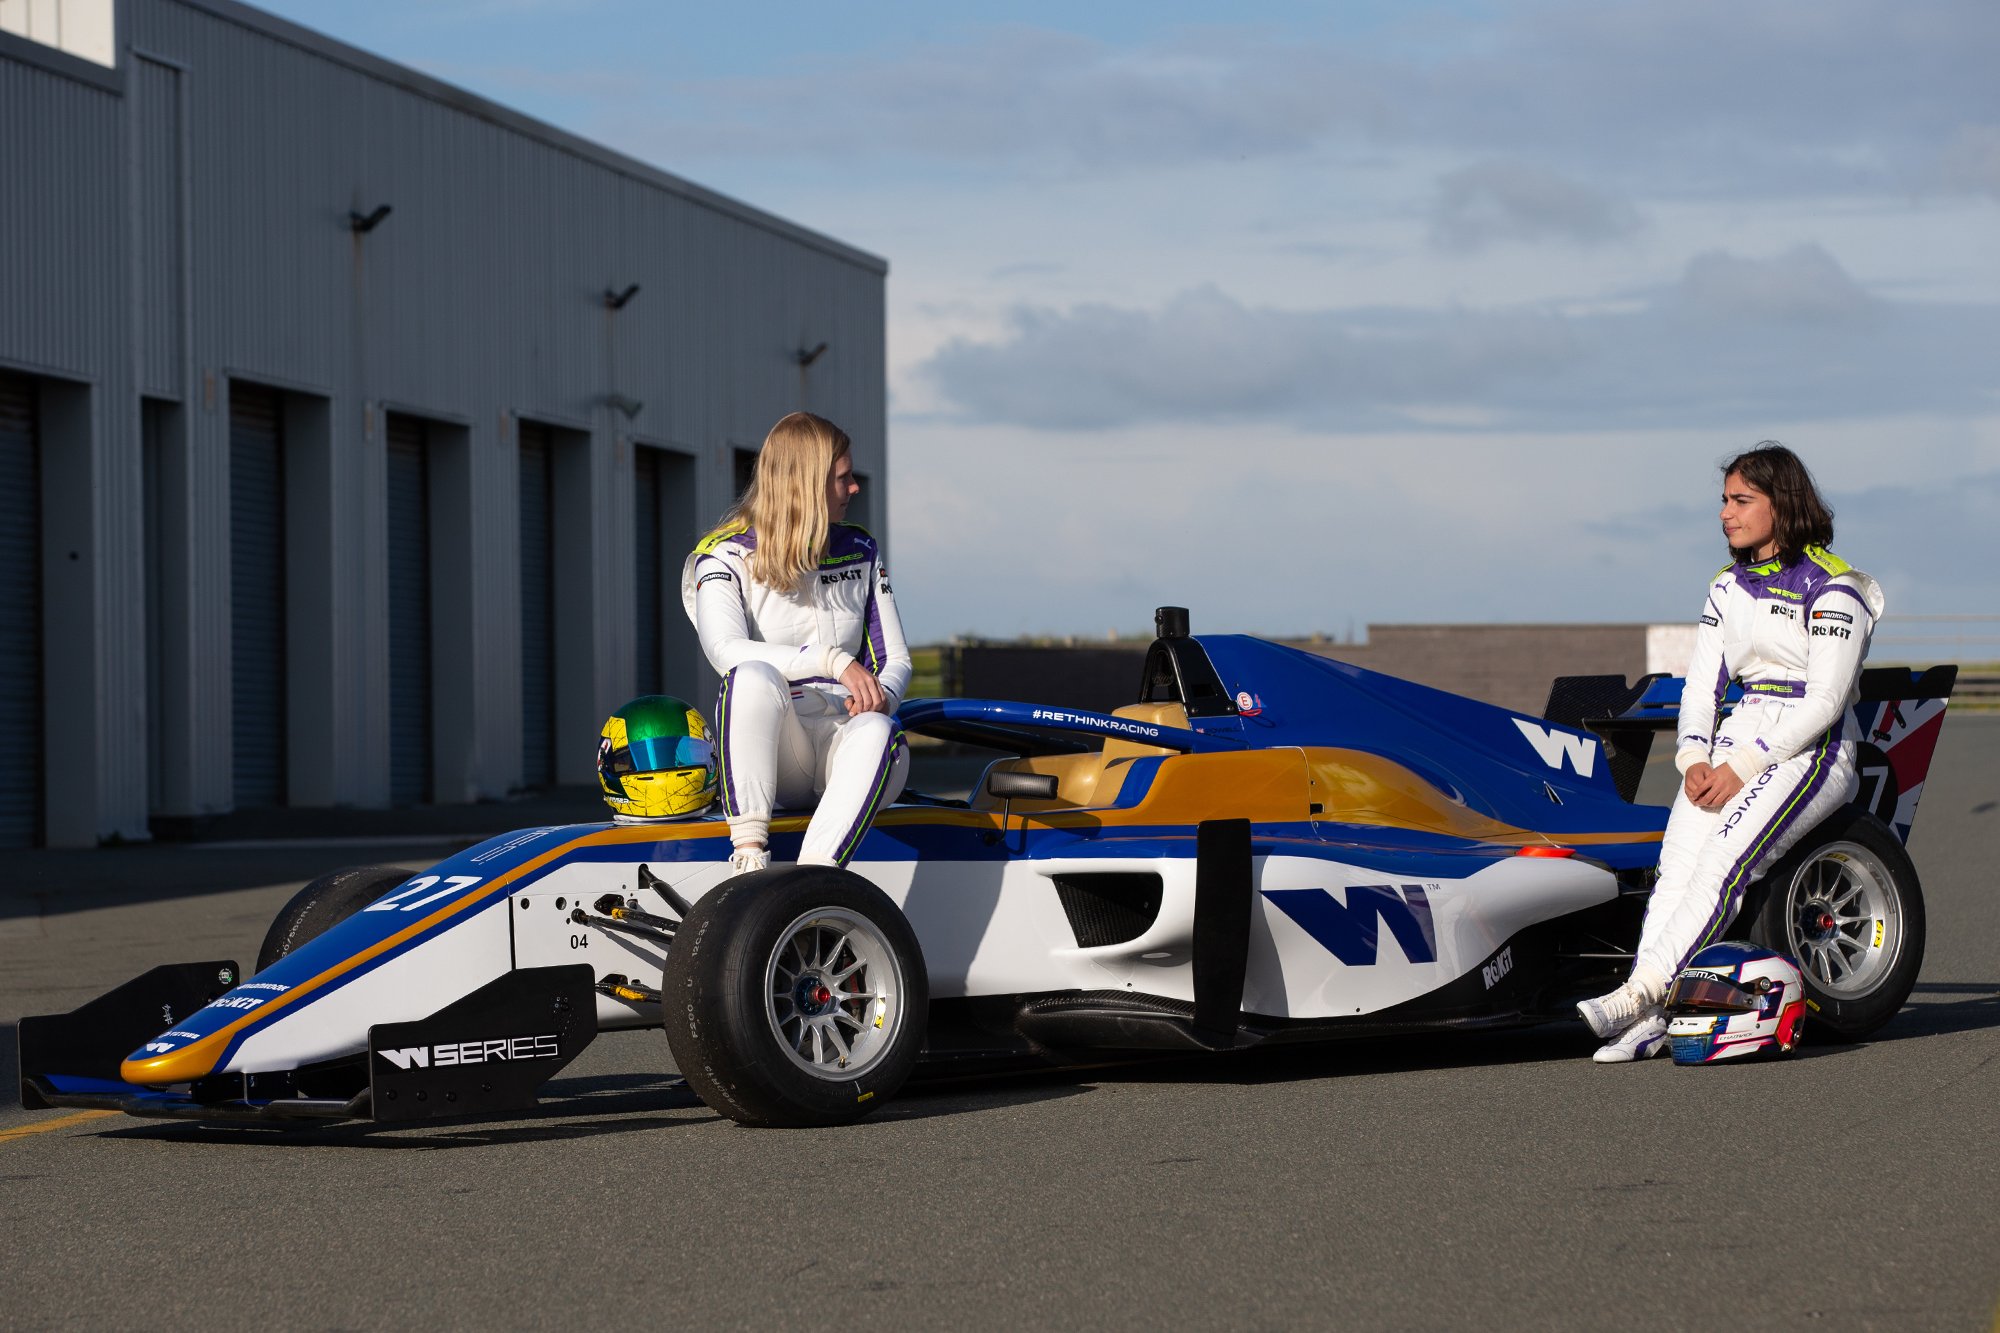 Jamie Chadwick and Beitske Visser wearing the Puma Motorsport racing suits for W Series